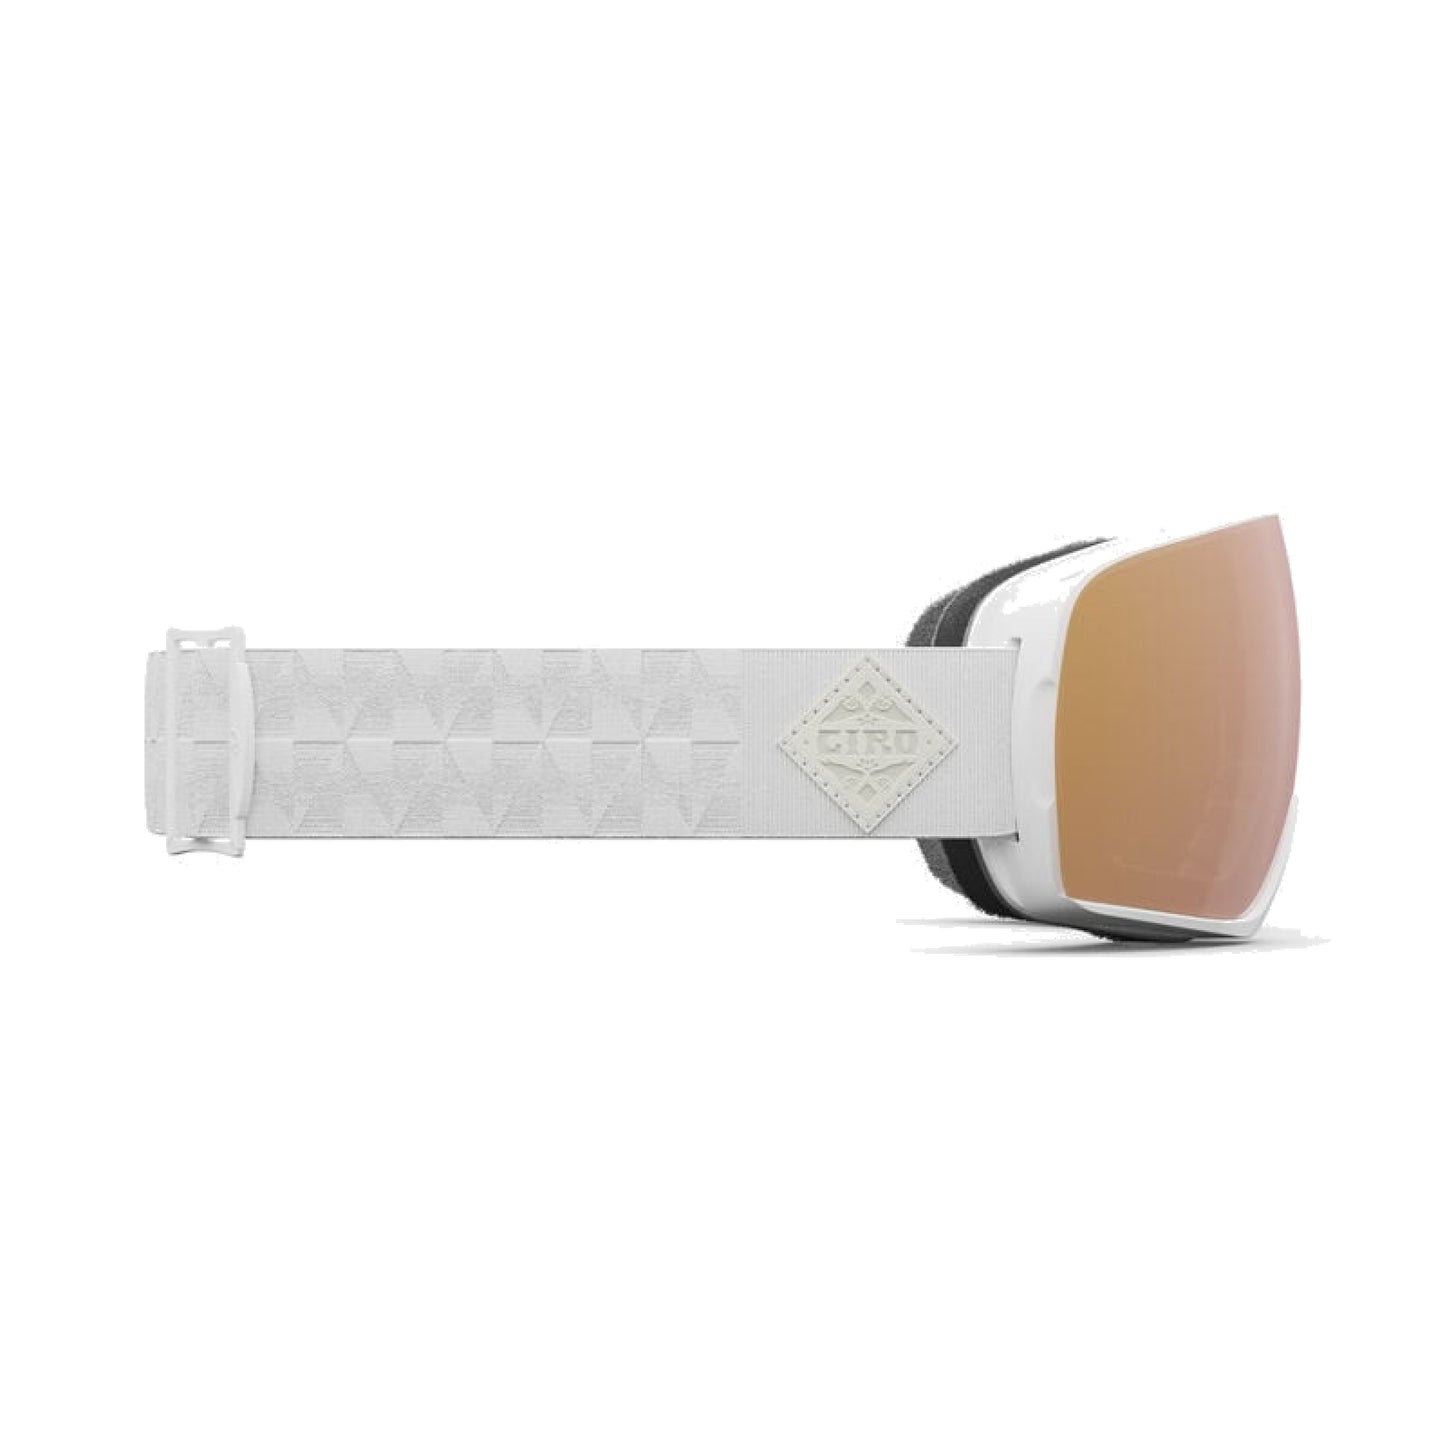 Giro Women's Article II Snow Goggles White Bliss Vivid Rose Gold Snow Goggles